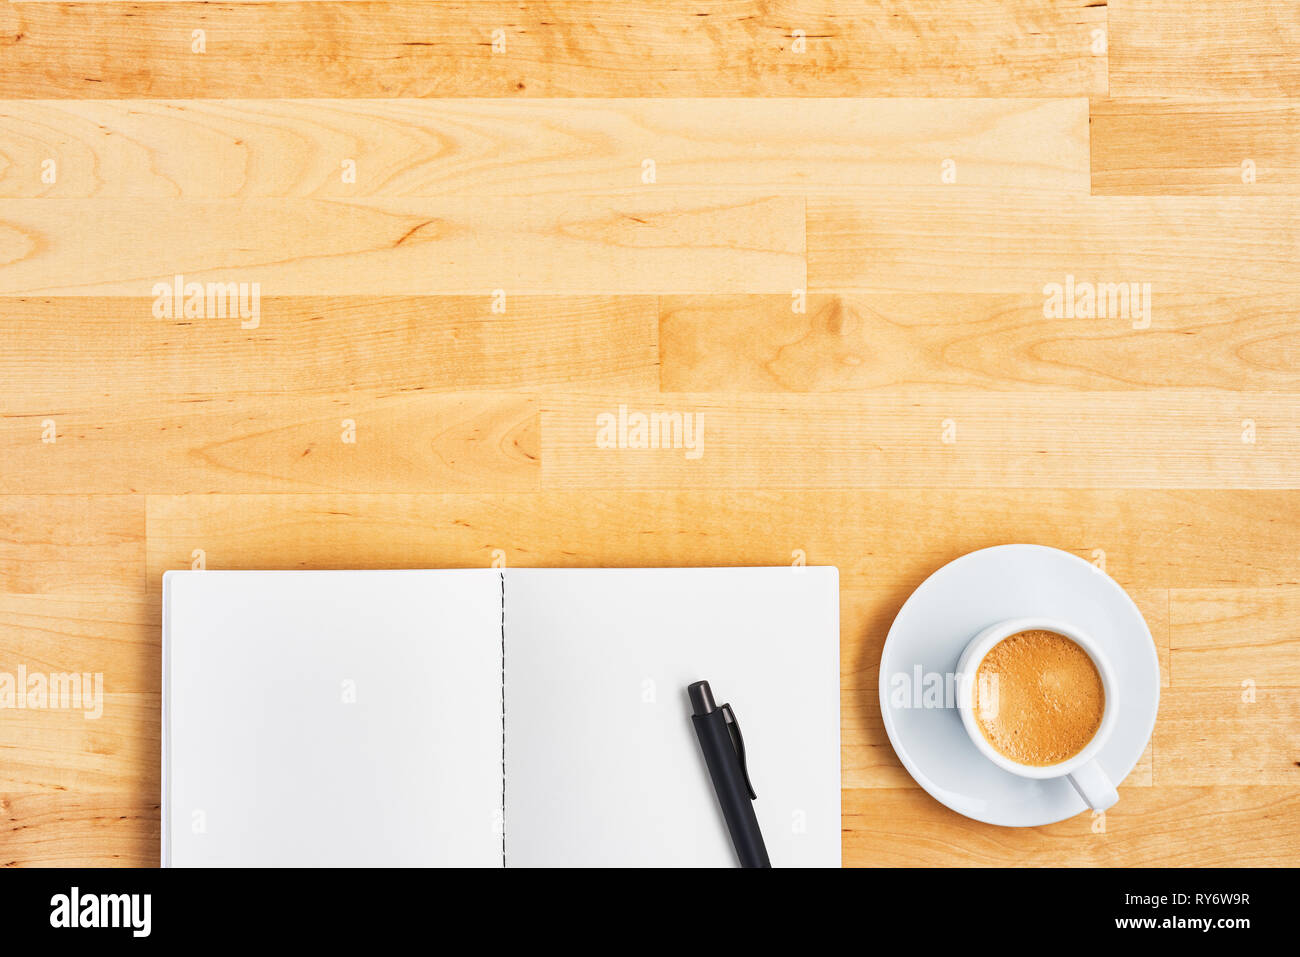 Office desk with blank notebook, pen and cup of coffee or espresso on yellow wooden table. Top view. Copy space for text. Flat lay. Stock Photo